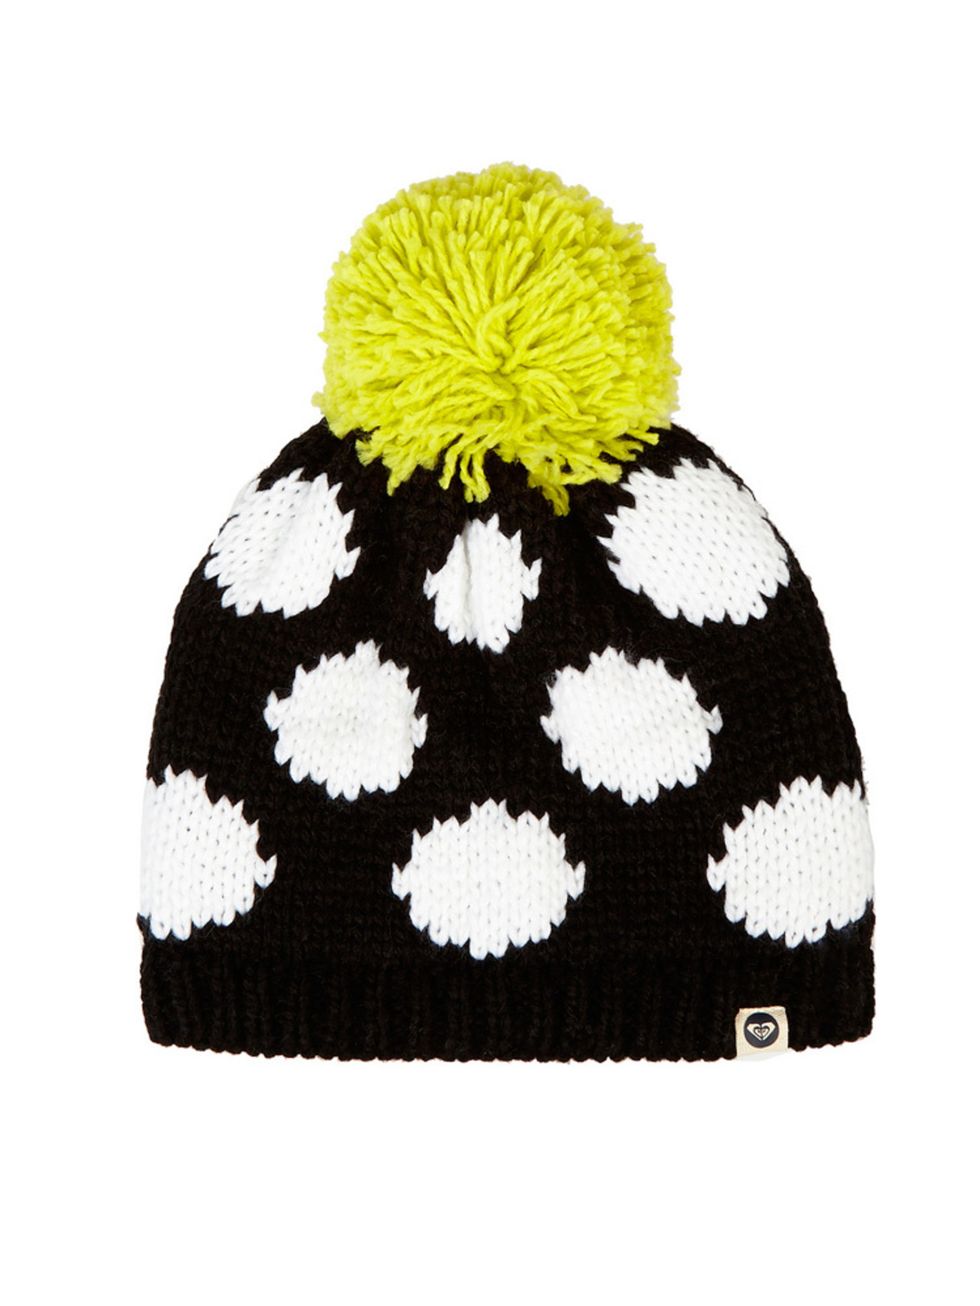 <p>House of Holland for Roxy knitted hat, £60 at <a href="http://www.net-a-porter.com/product/503867/House_of_Holland/-roxy-polka-dot-knitted-hat" target="_blank">net-a-porter.com</a></p>